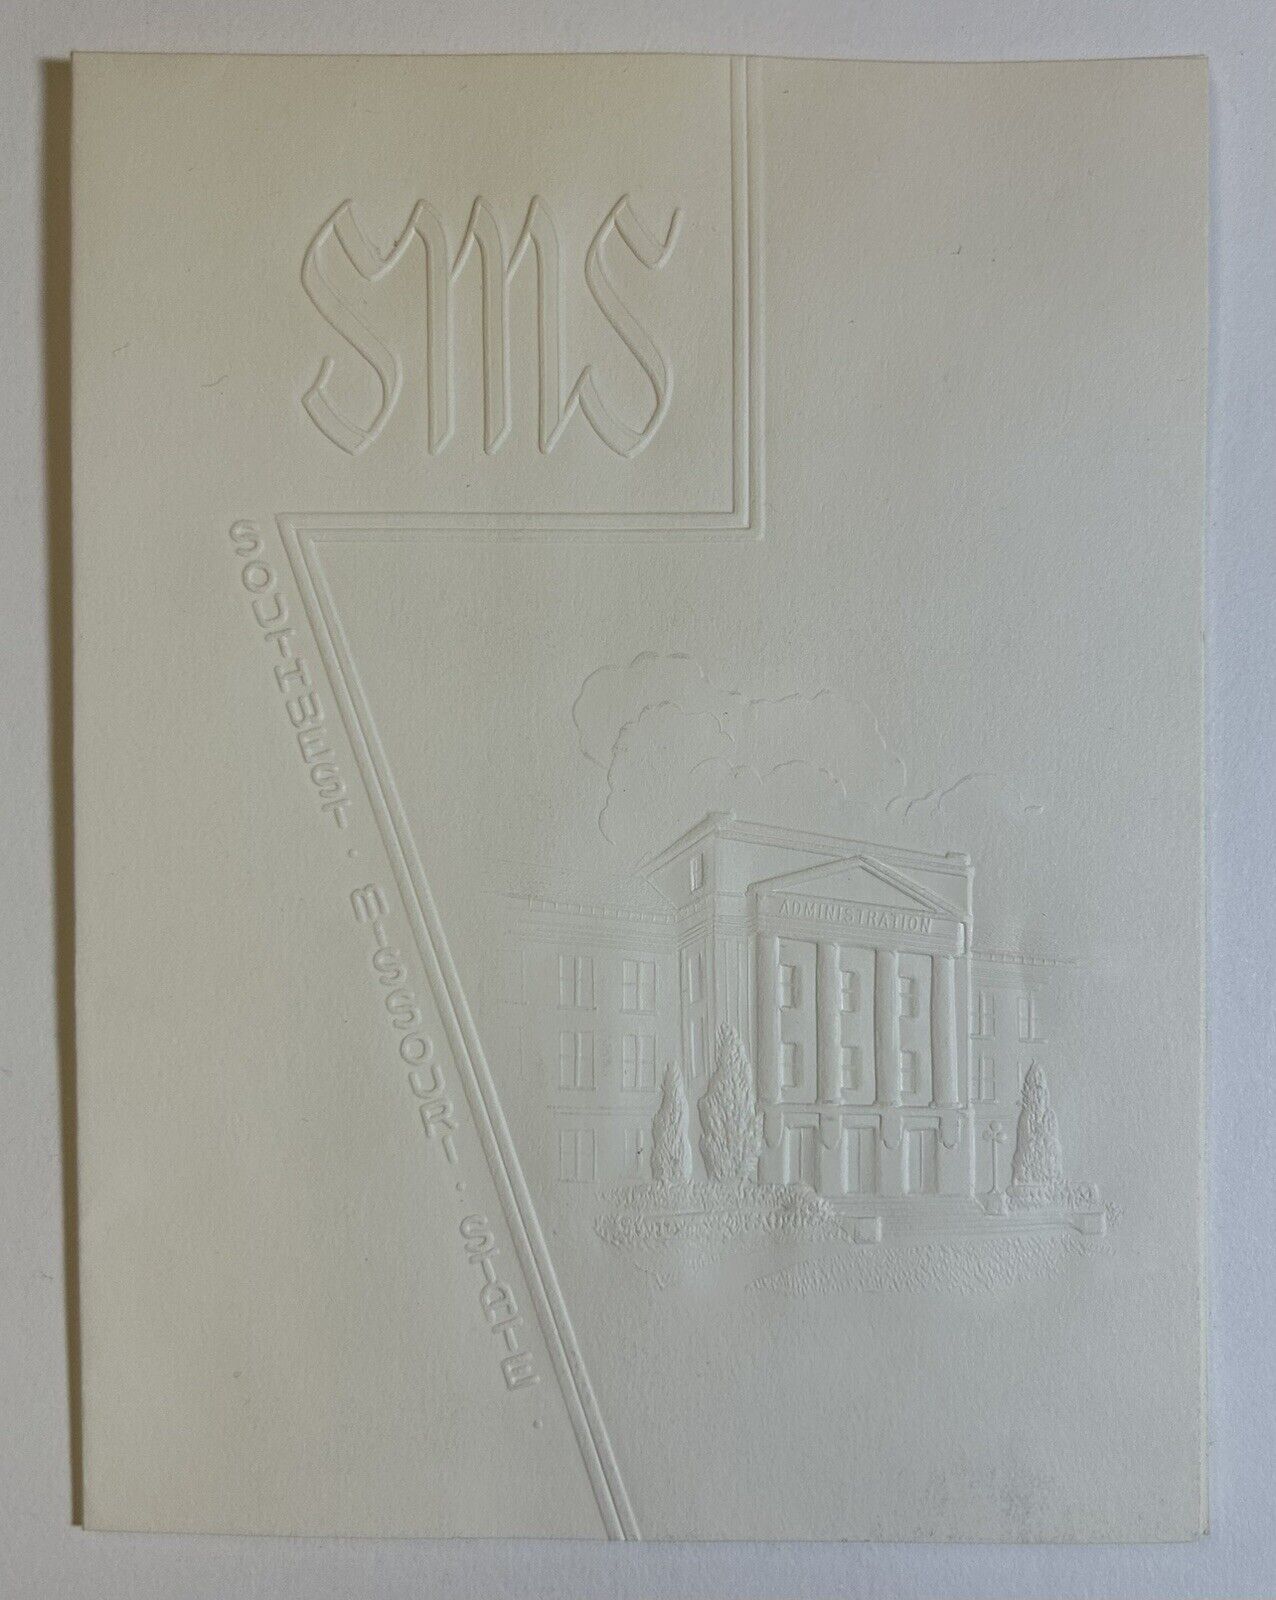 Southwest Missouri State, SMS 1960 Commencement Booklet